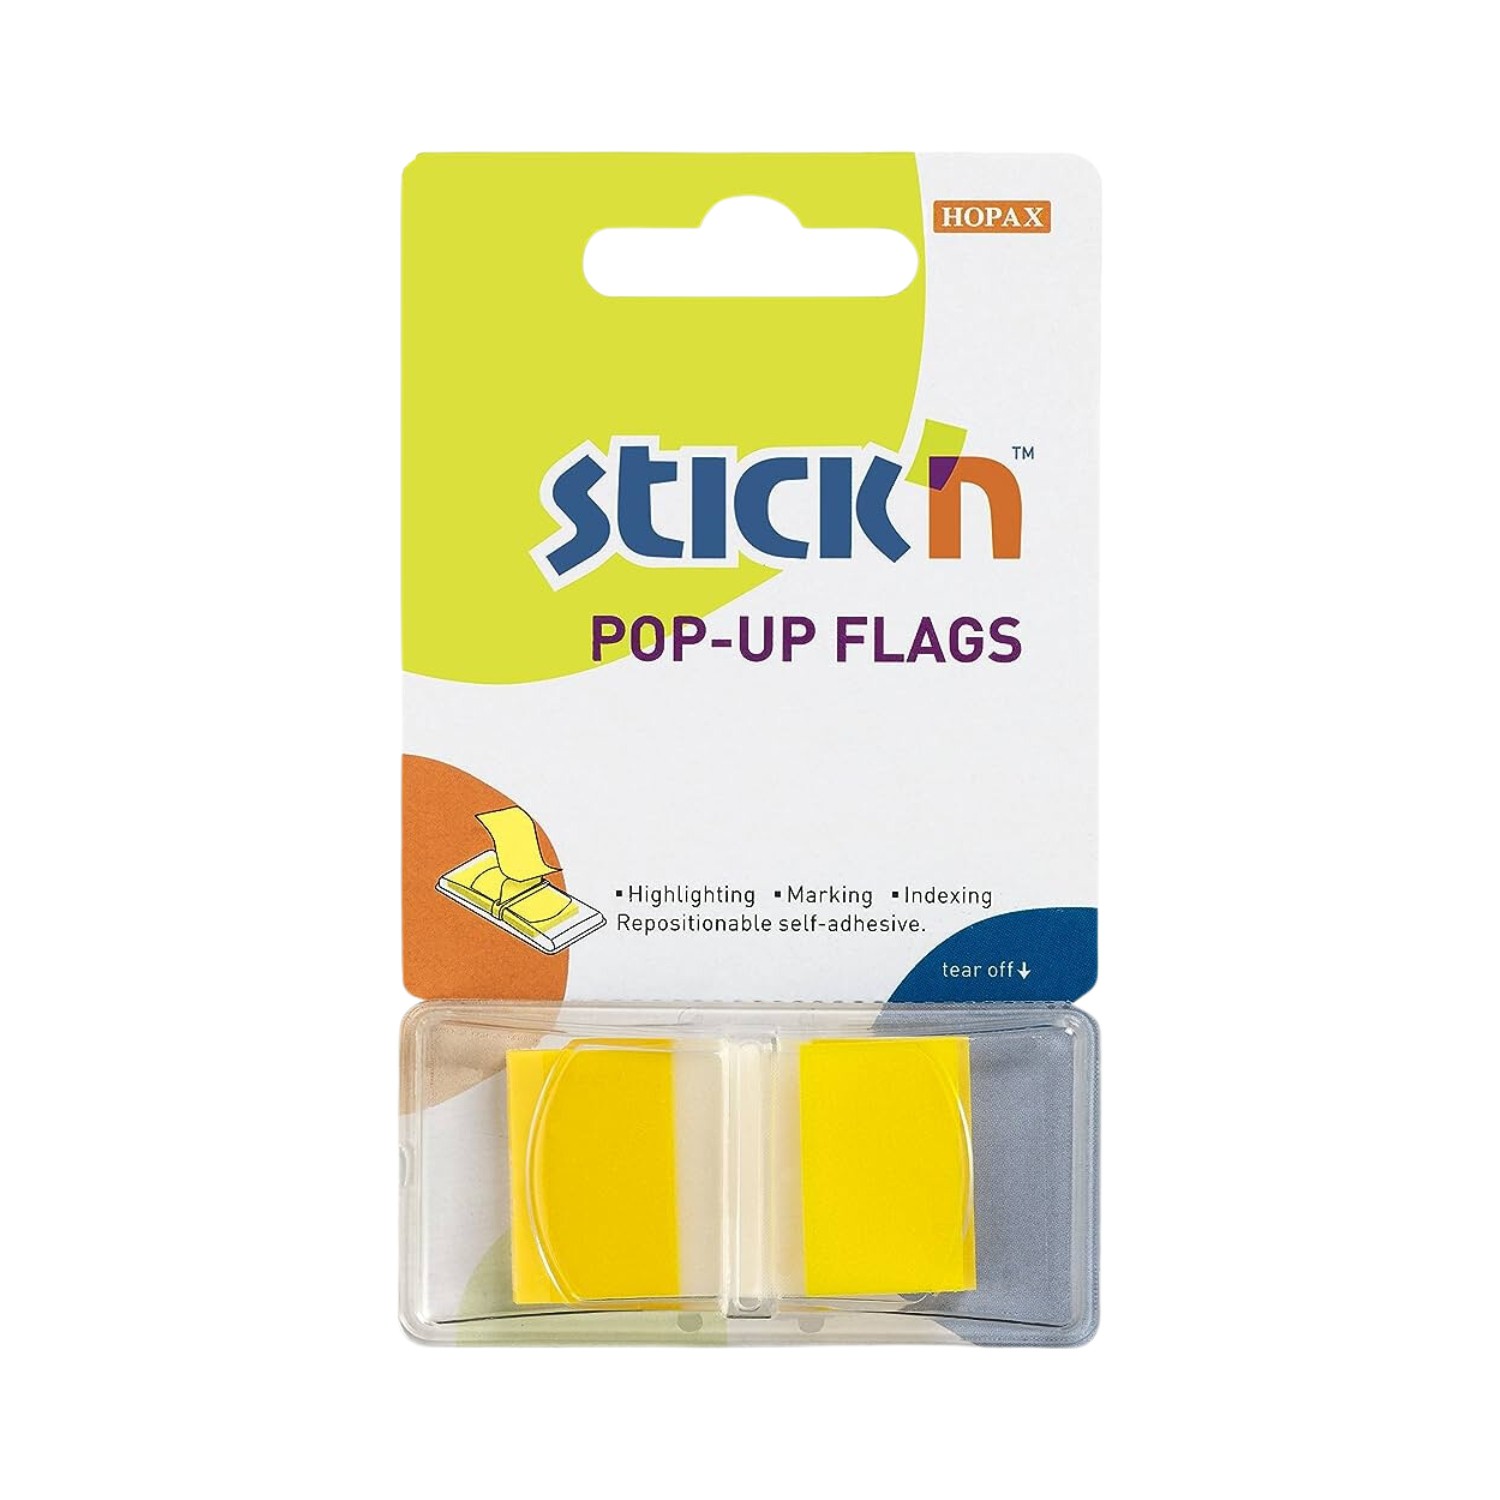 Stick+%27n+Pop-Up+Flags+45+x+25mm+Yellow